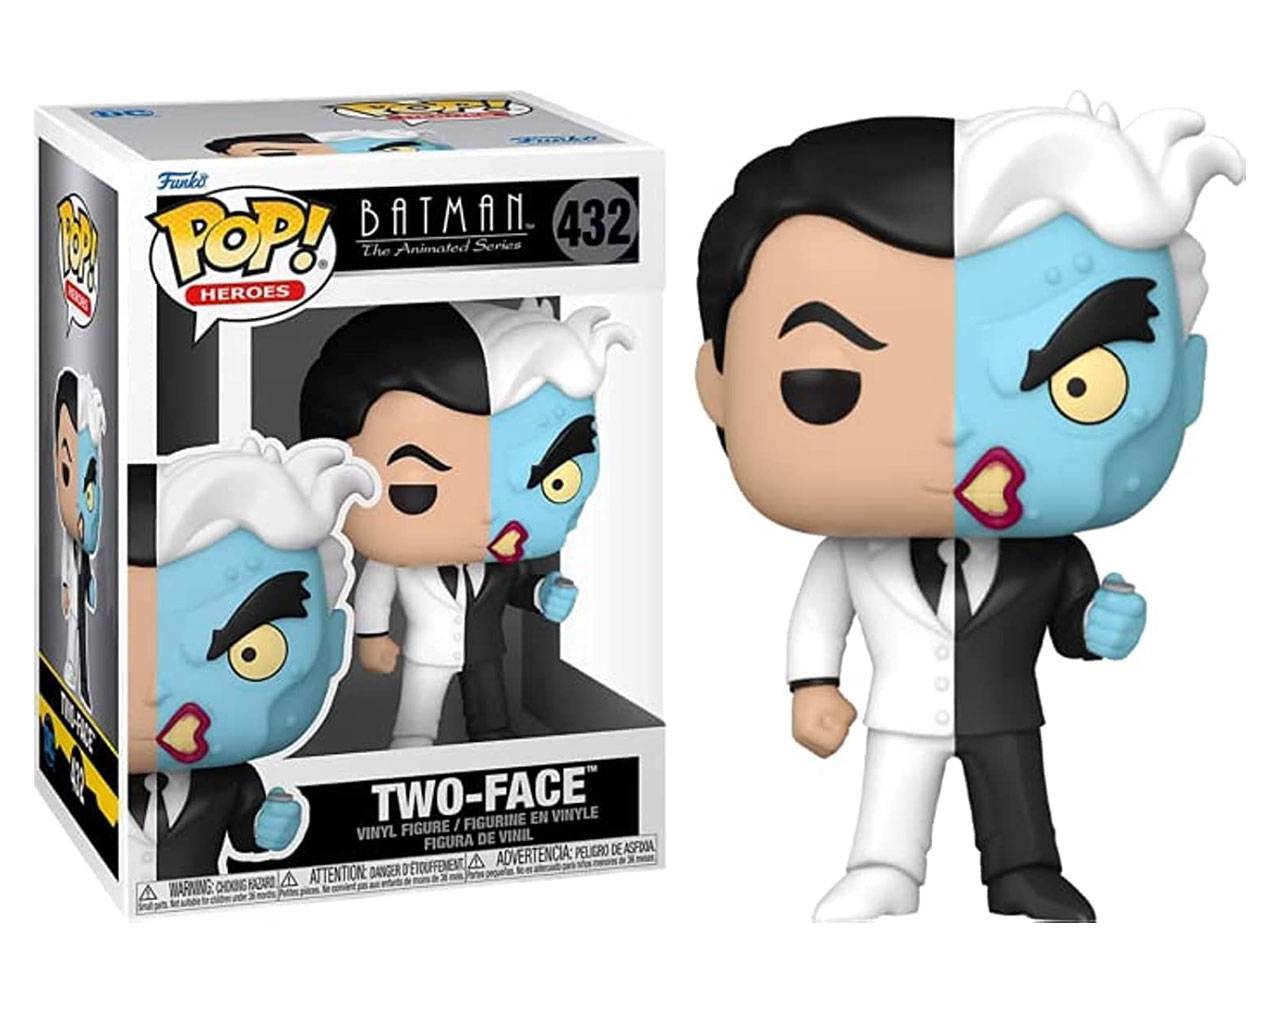 Two-Face (The Animated Series) Pop! Vinyl